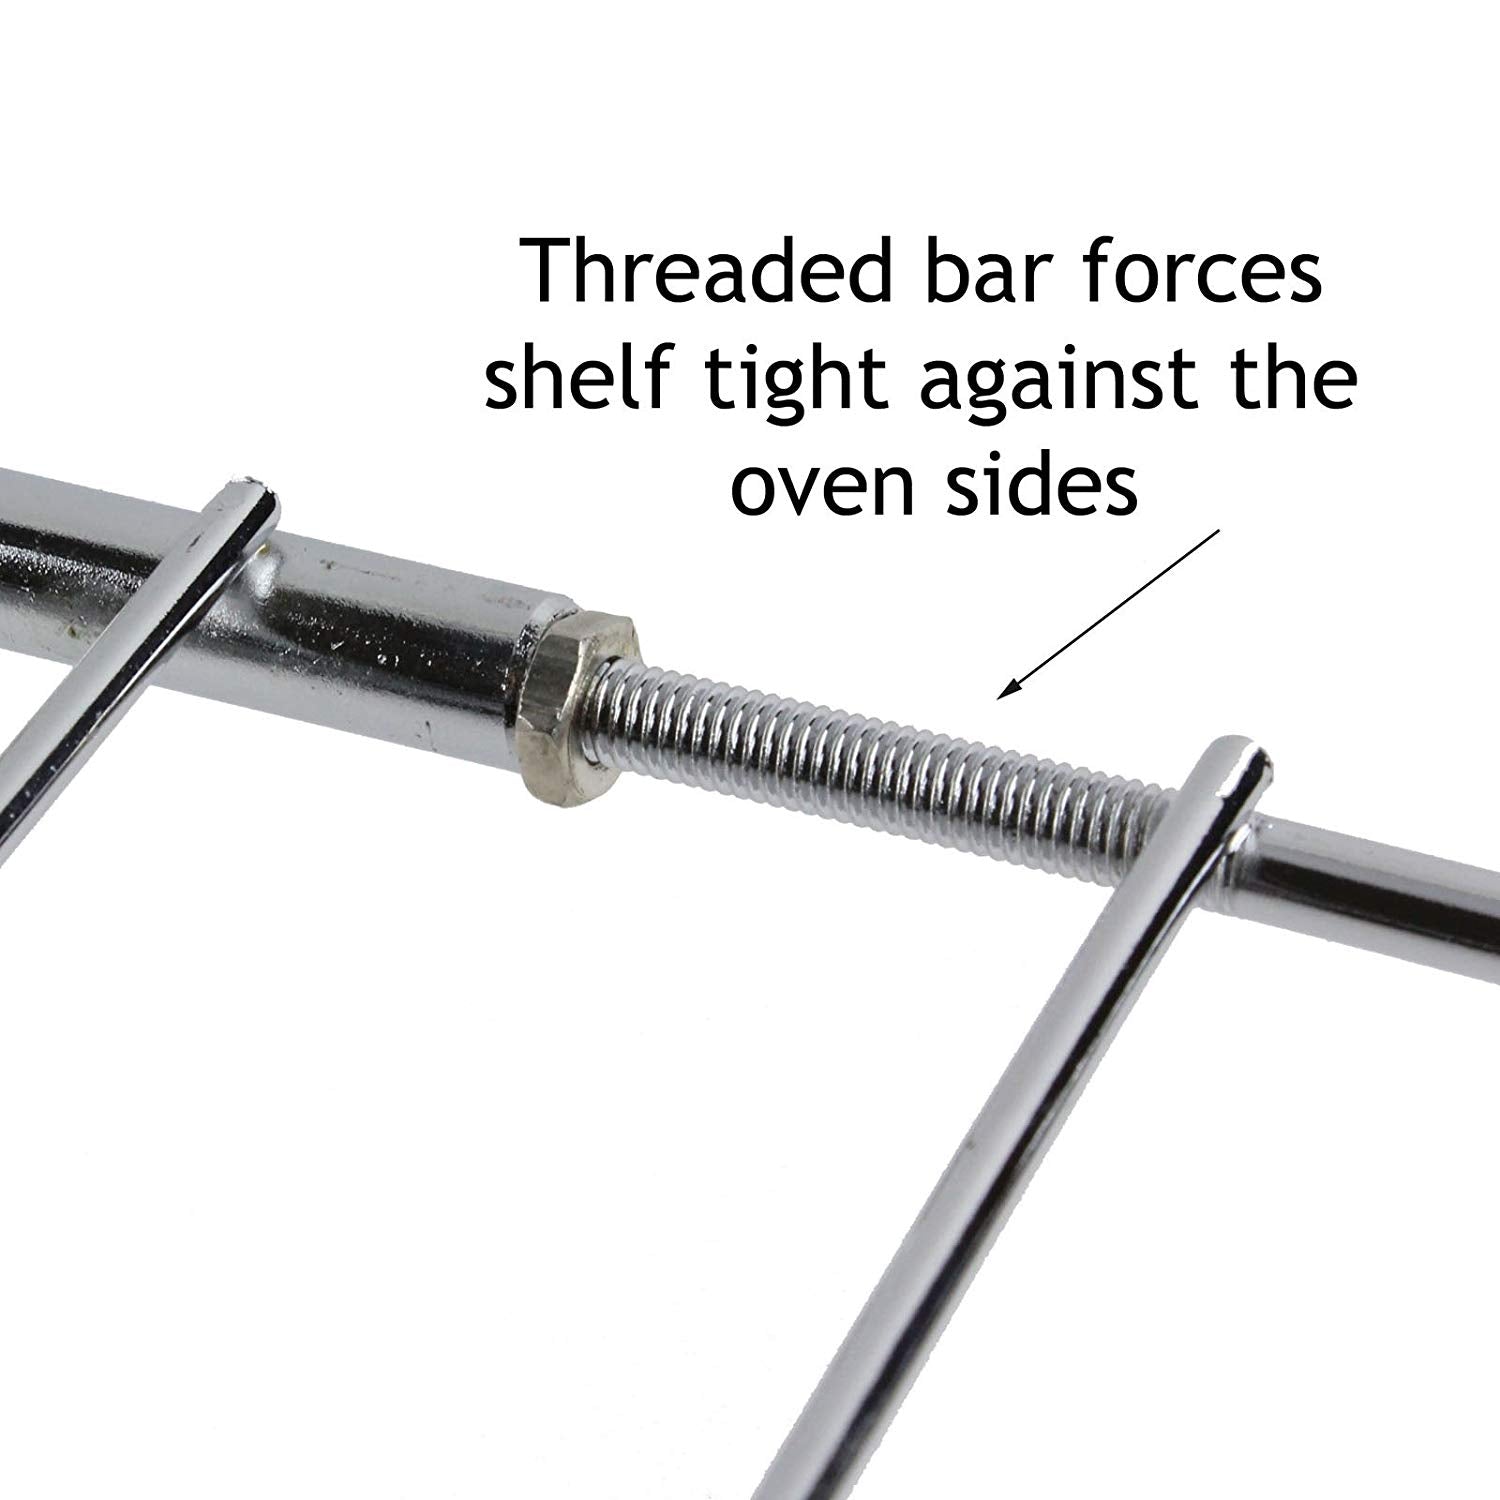 Adjustable Extendable Shelf for Electrolux Oven Cooker (310 x 360-590mm, Pack of 3)